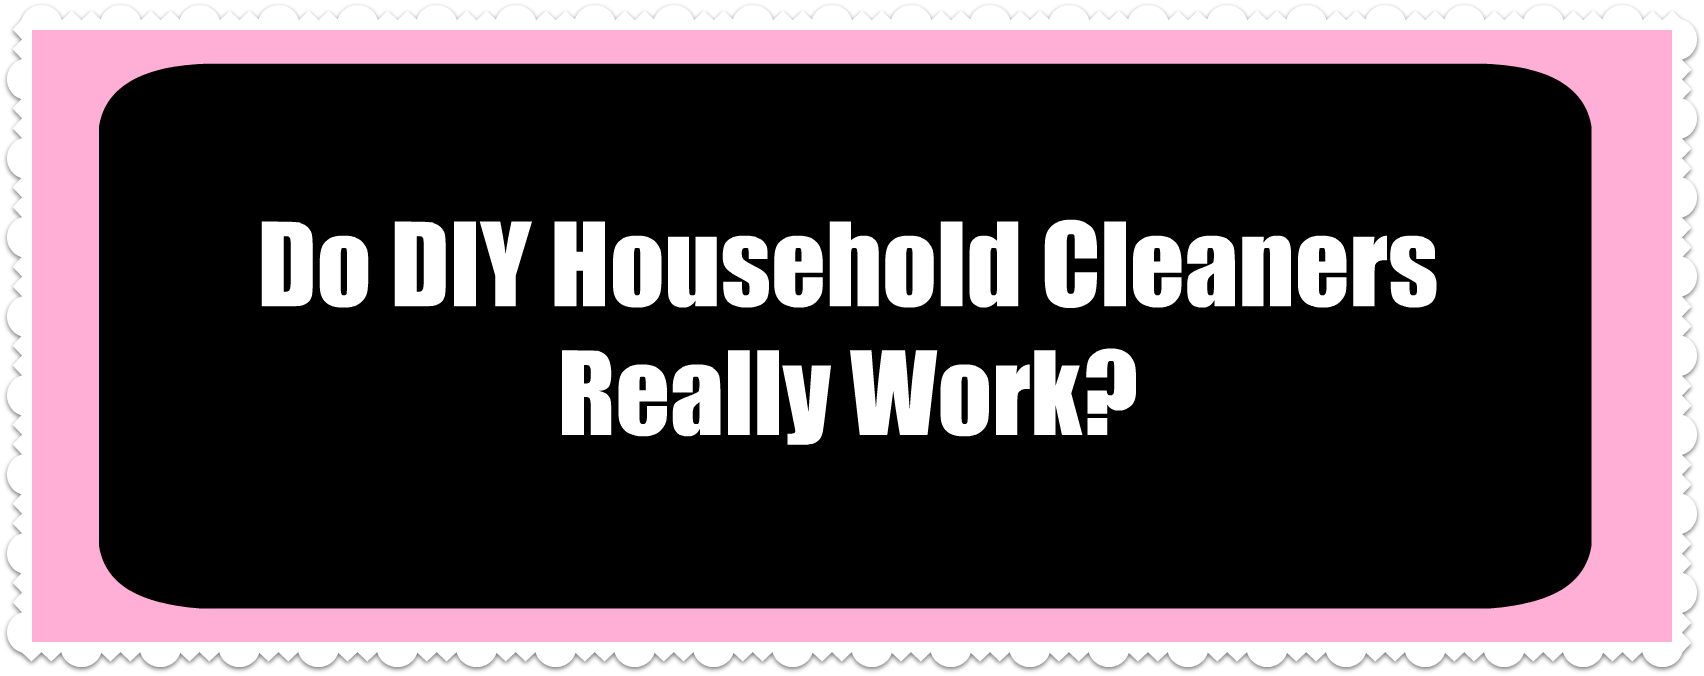 Do DIY Household Cleaners Really Work?